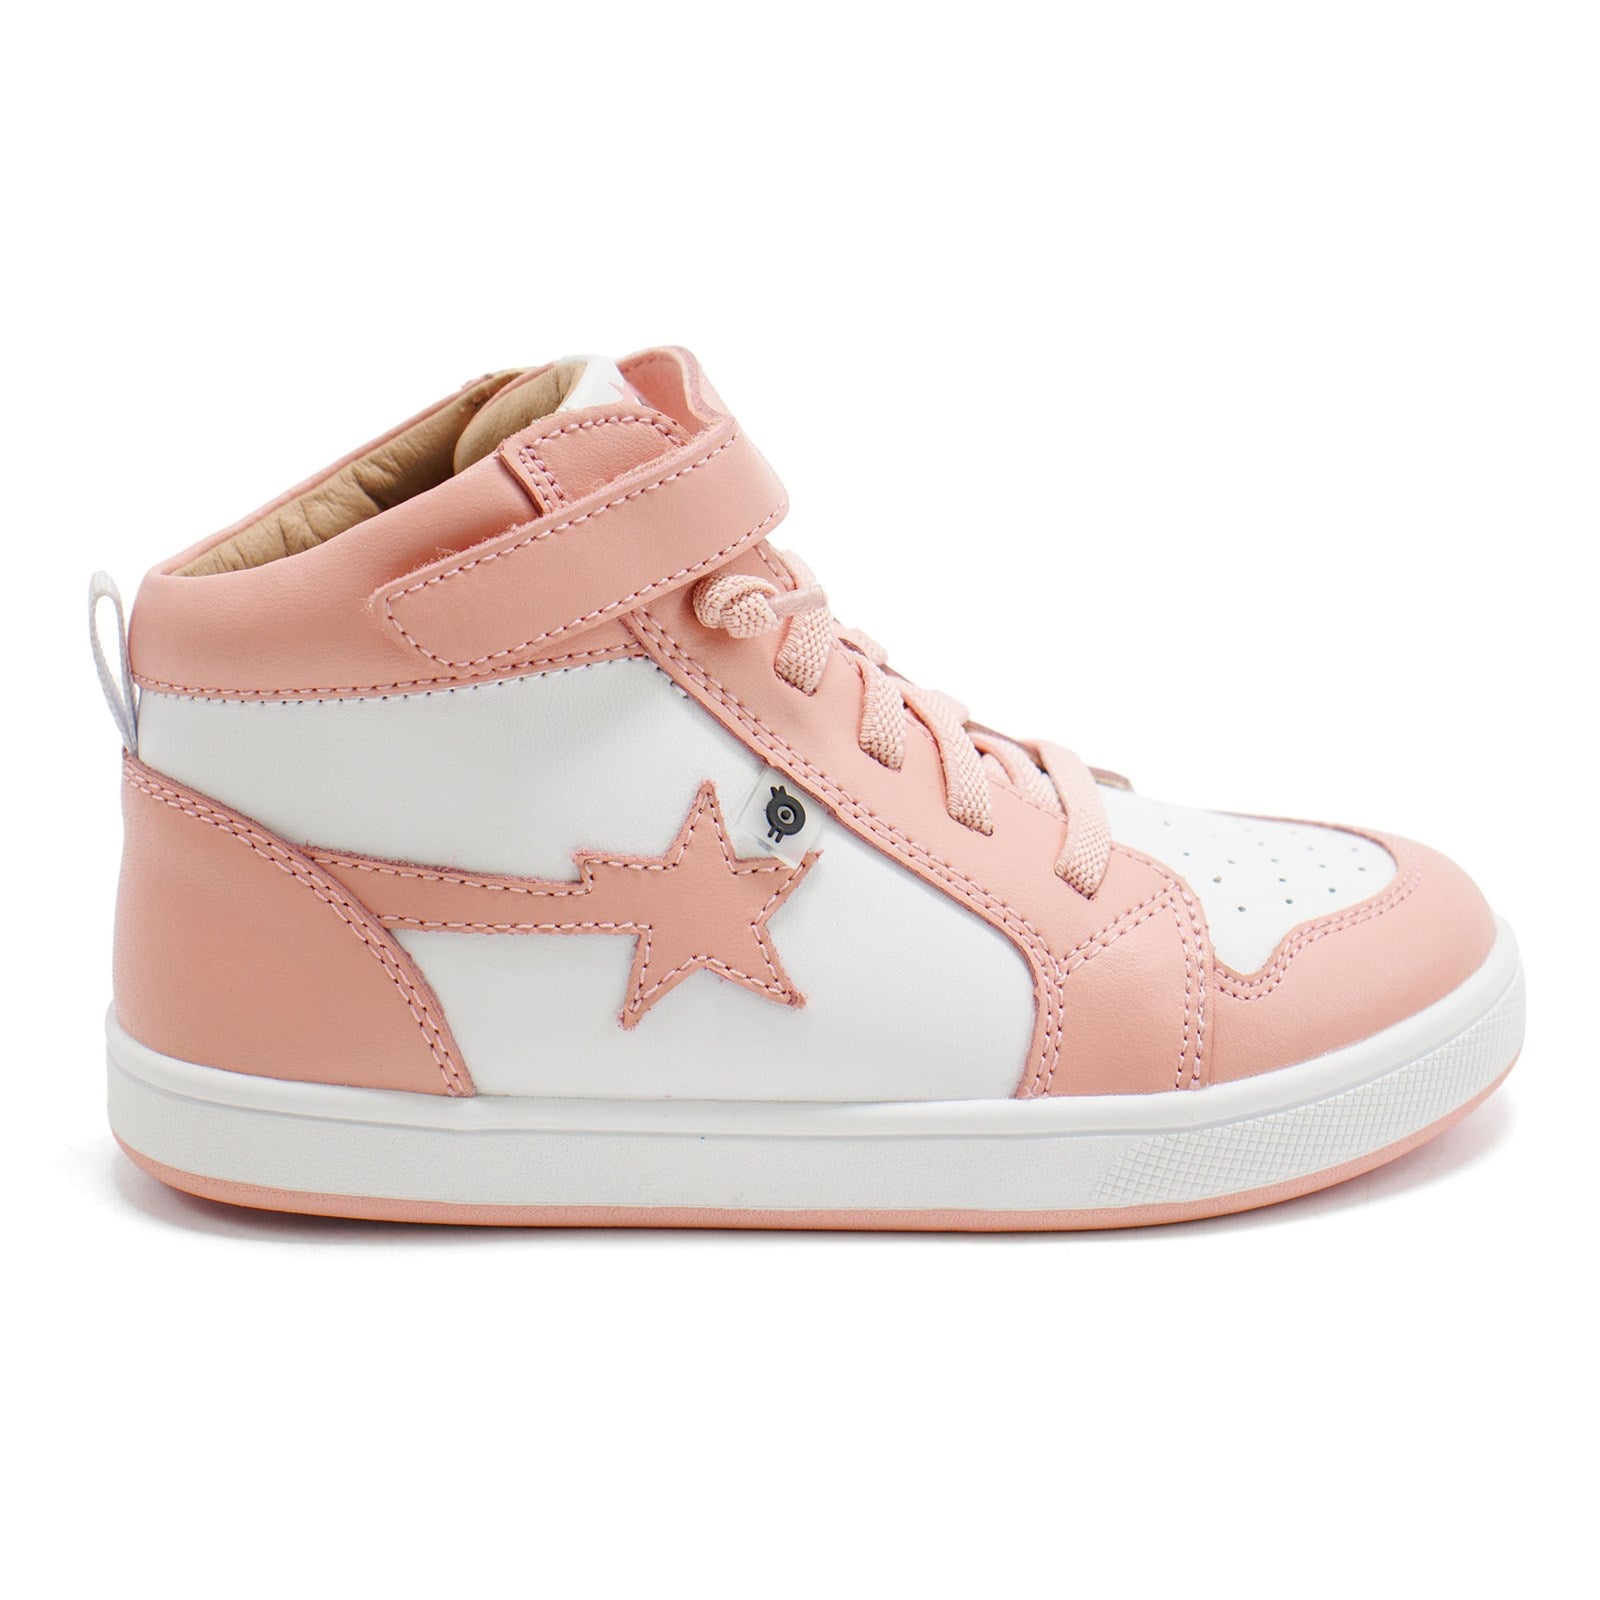 Old Soles Girl Team Star High Top Lace-Up Sneakers